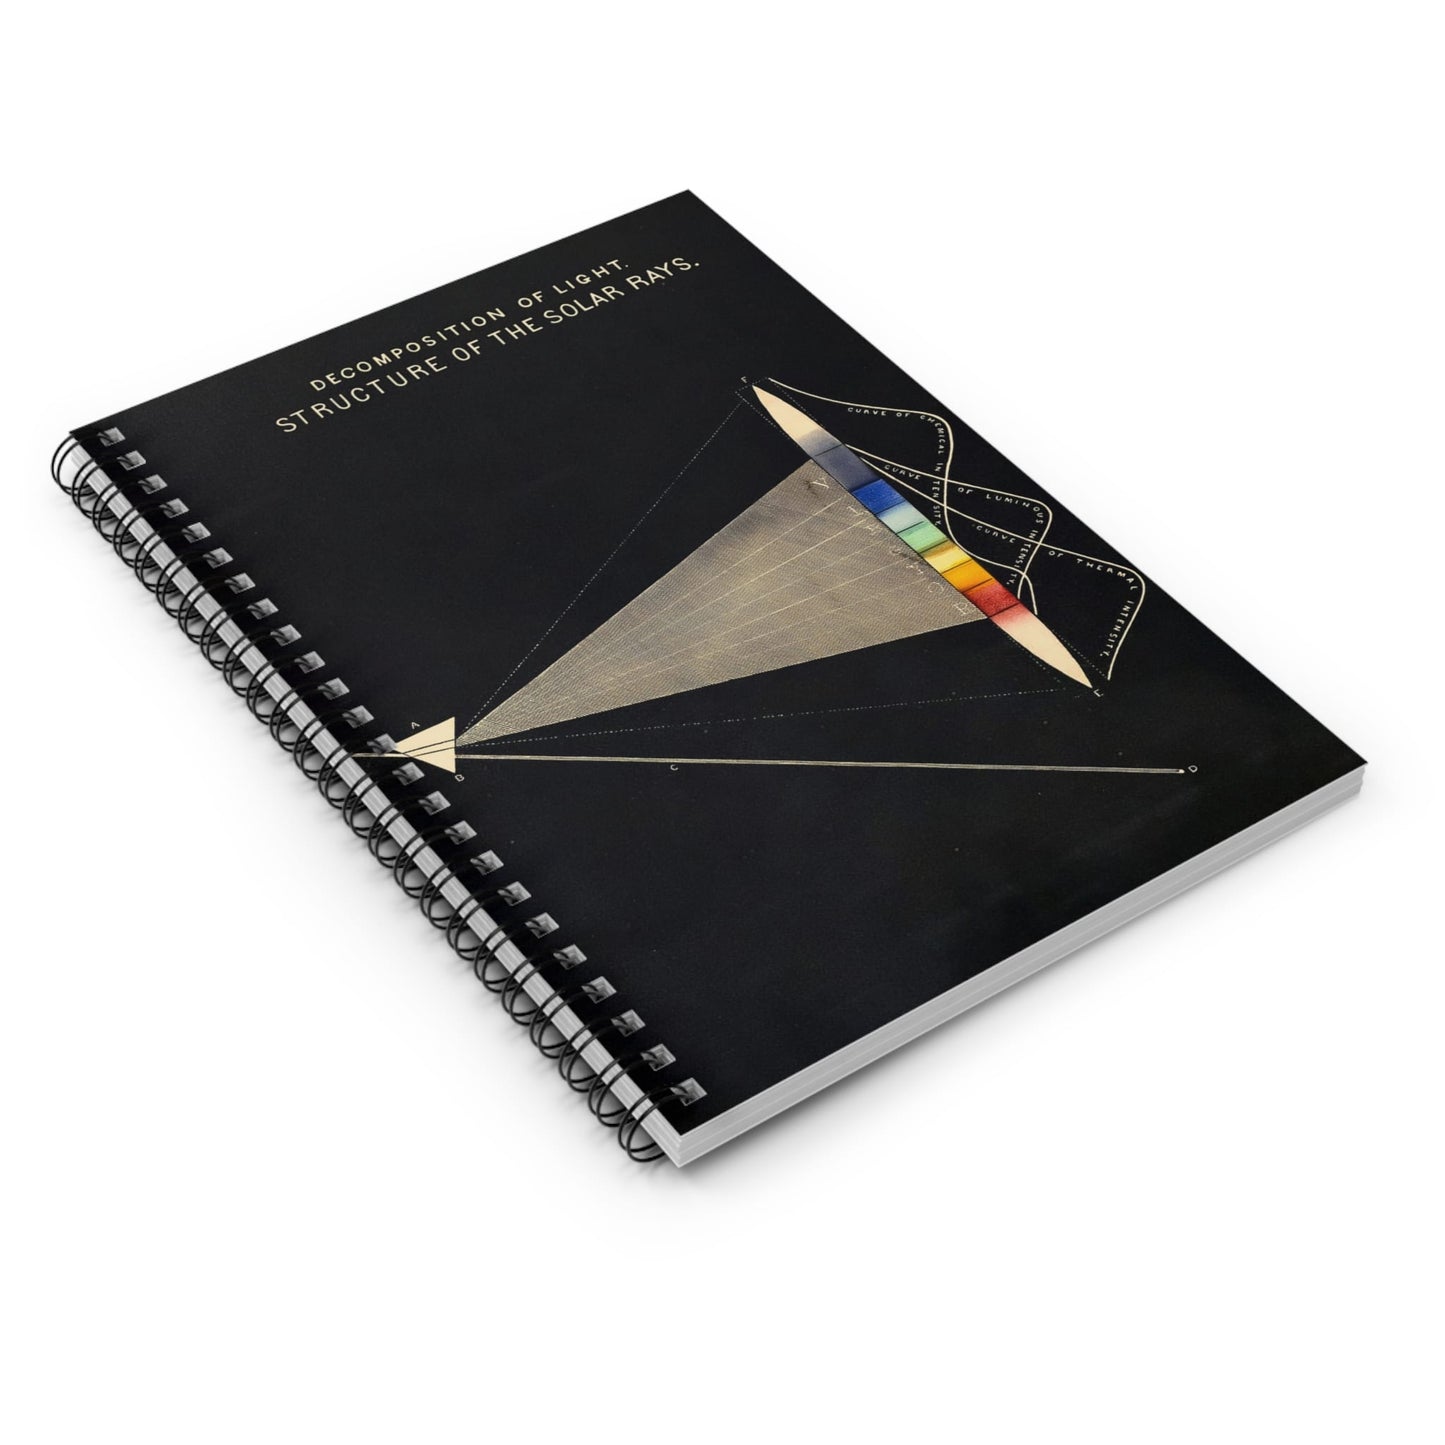 Scientific Spiral Notebook Laying Flat on White Surface